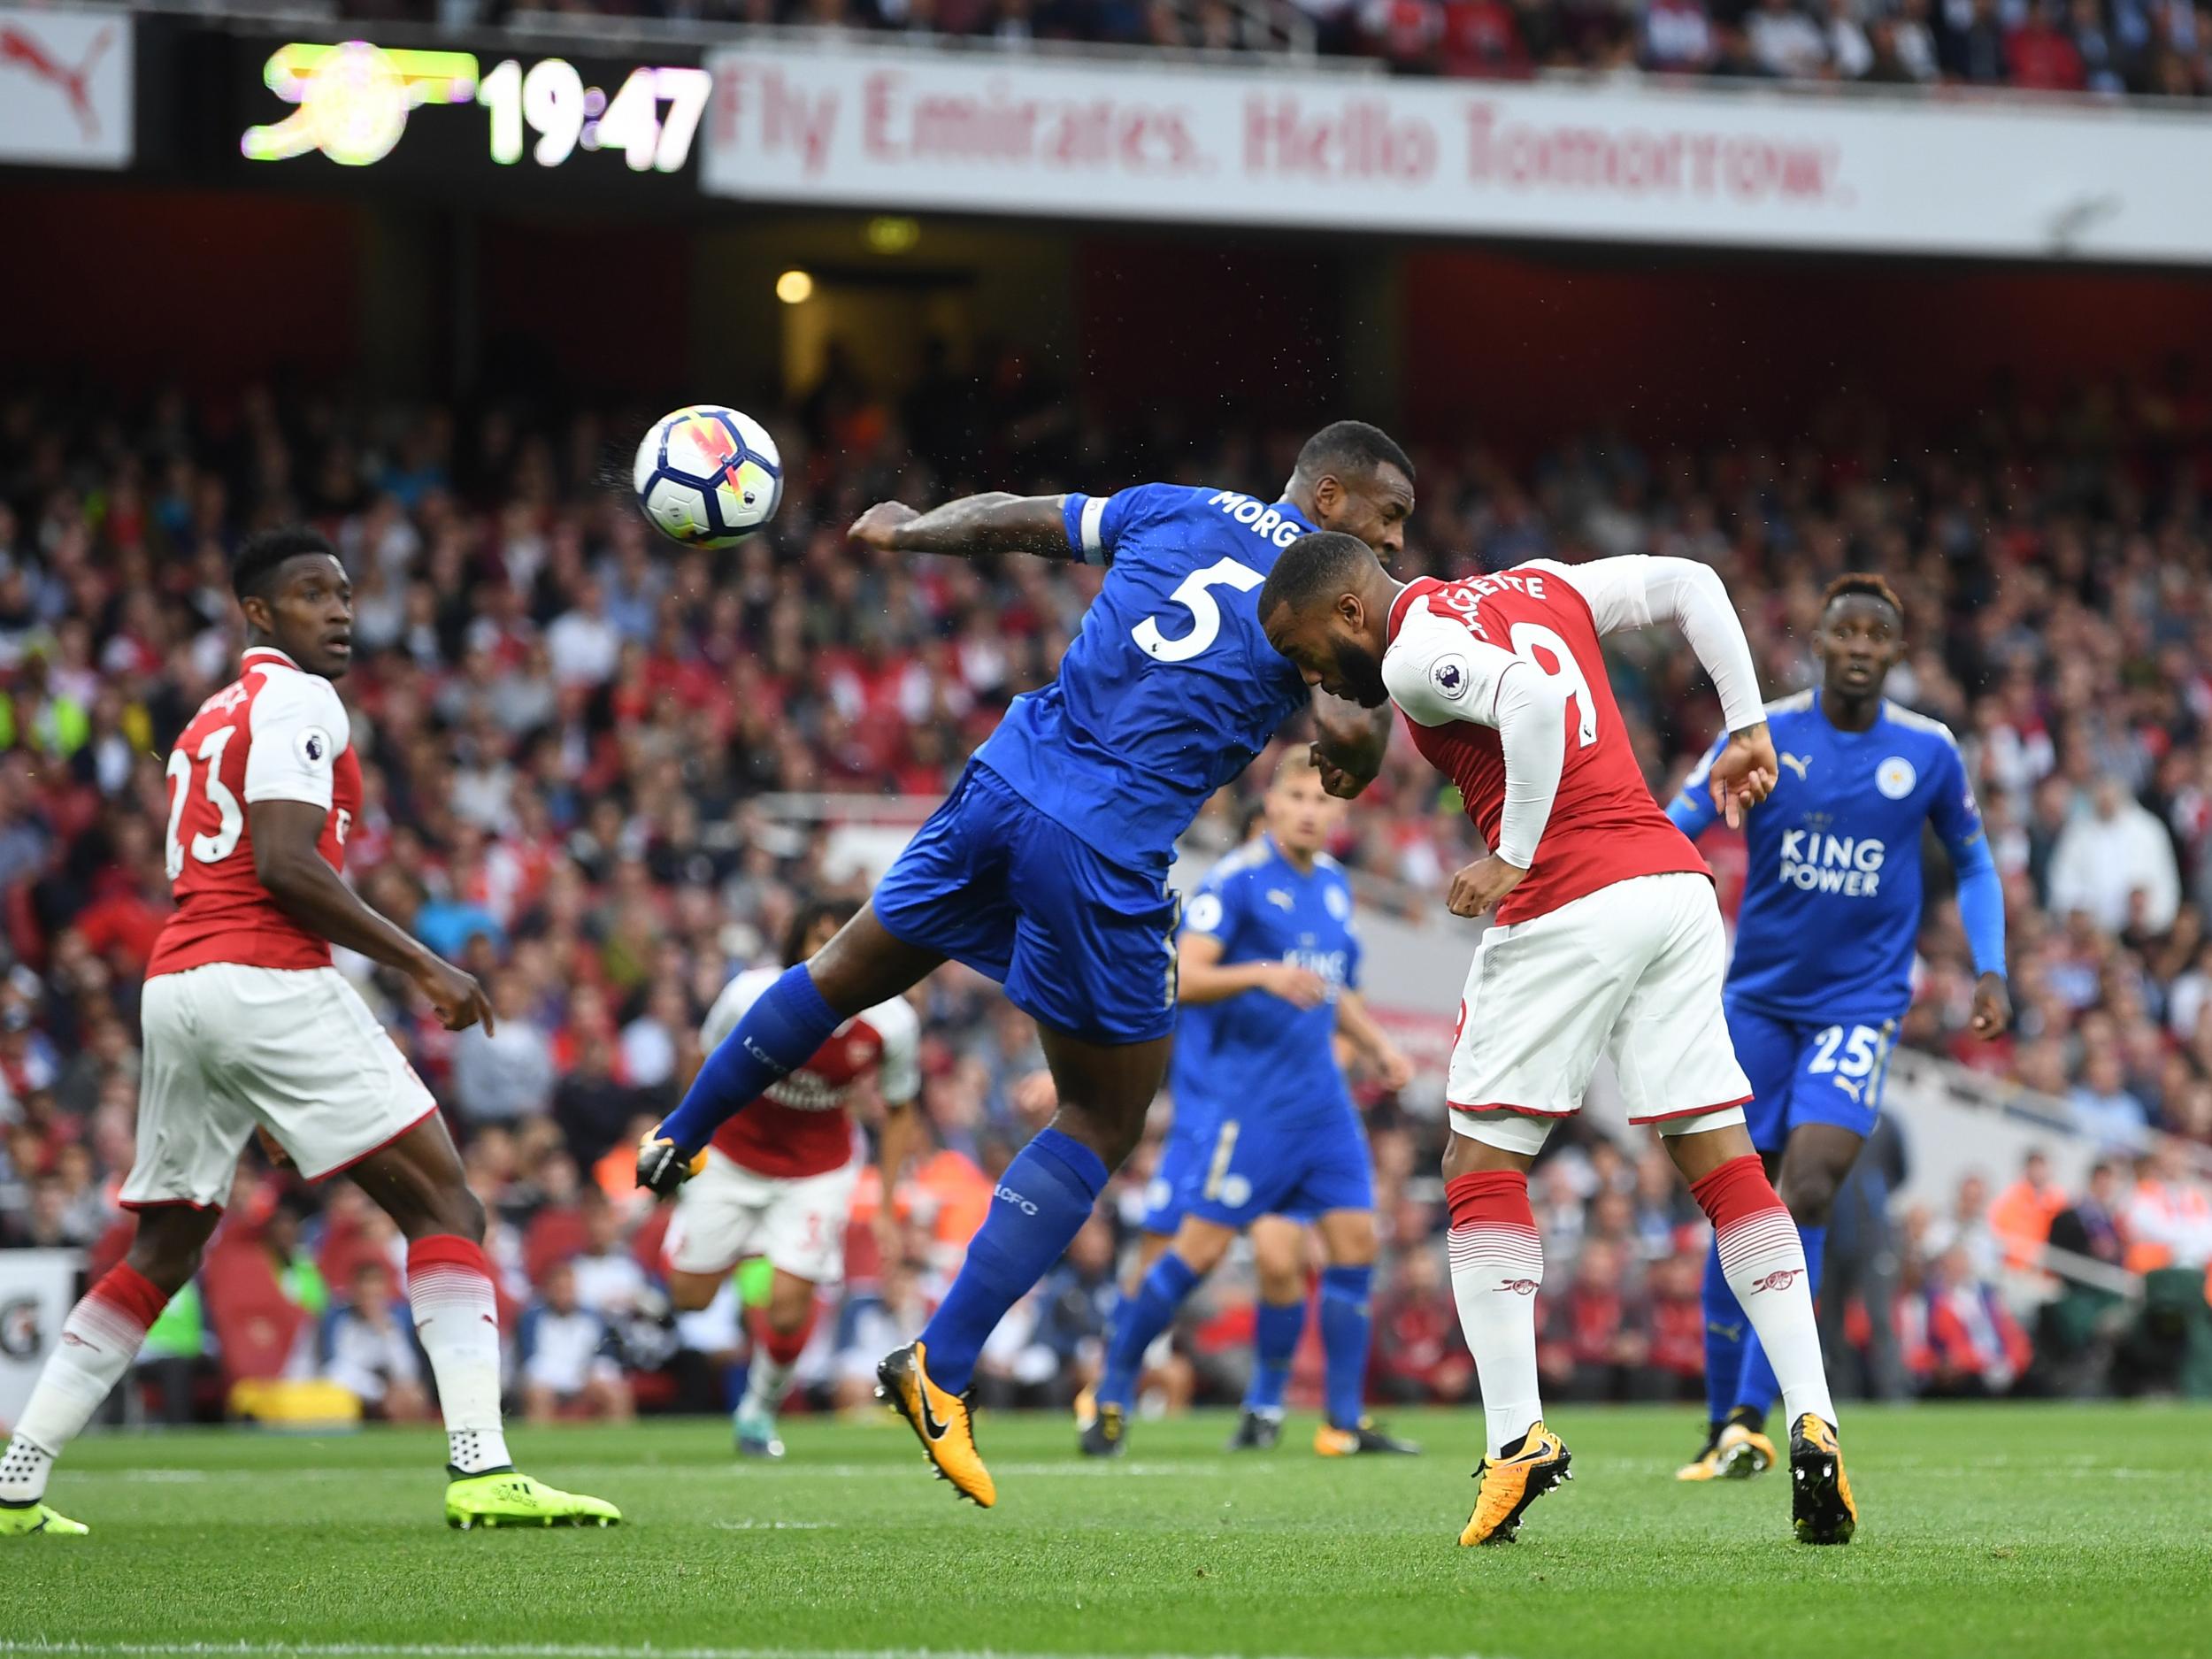 Alexandre Lacazette scored a deft header within two minutes of his home debut